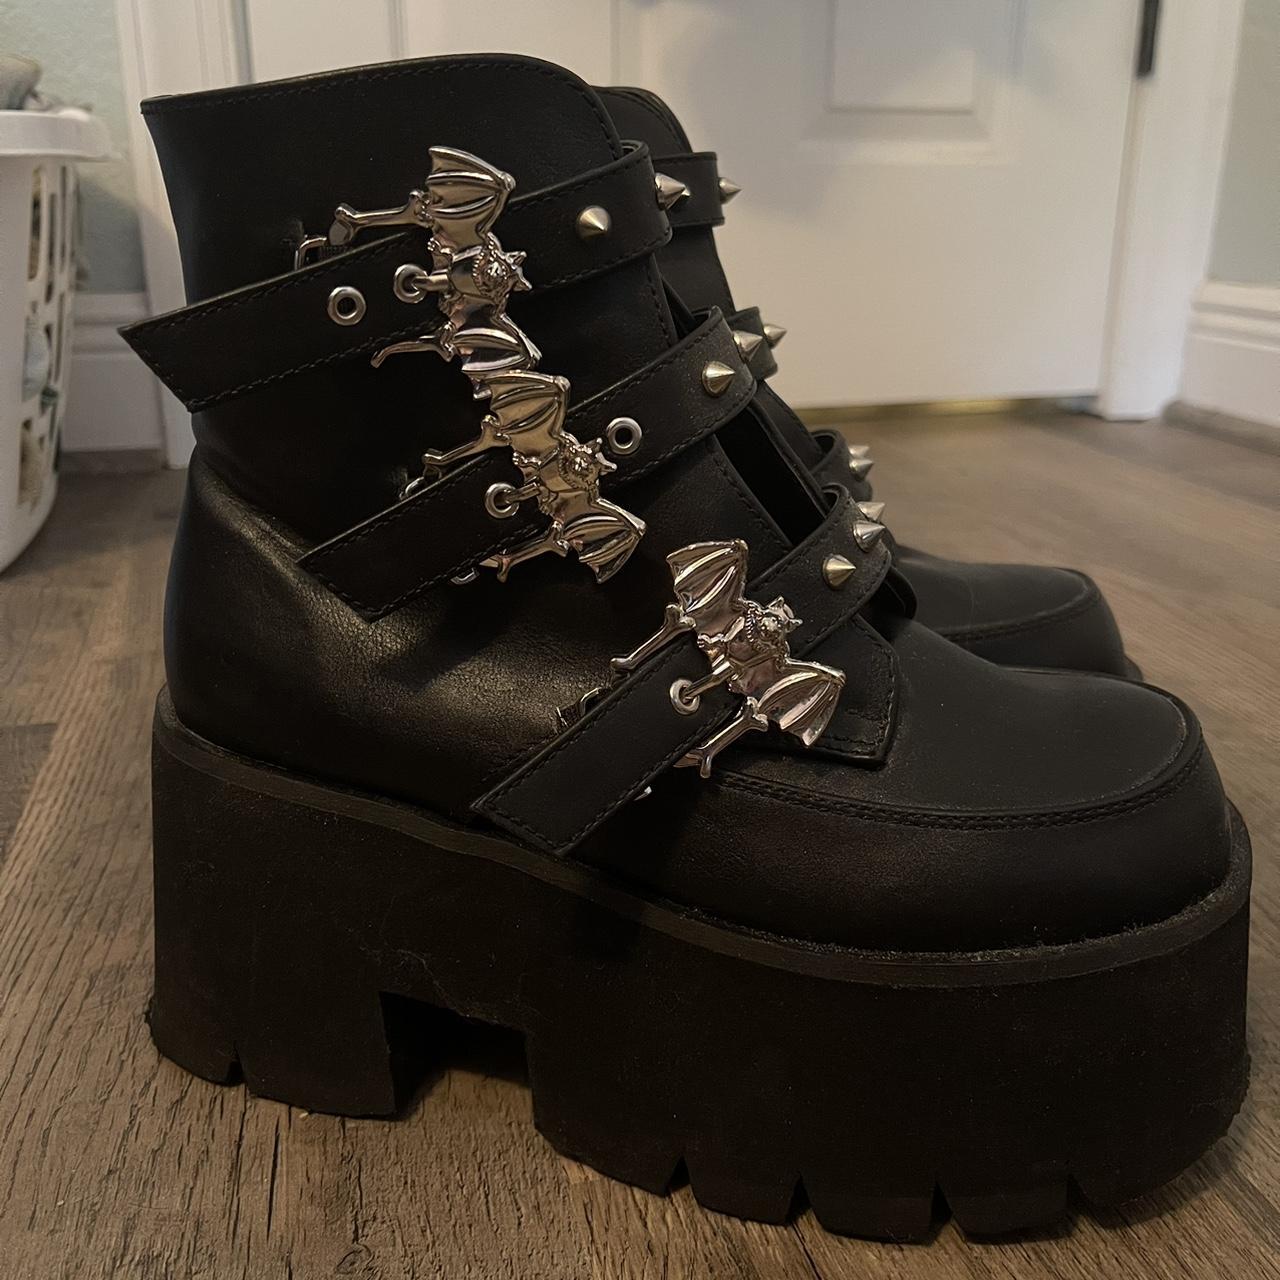 Demonia Ashes-55 boot. Only worn three times. - Depop